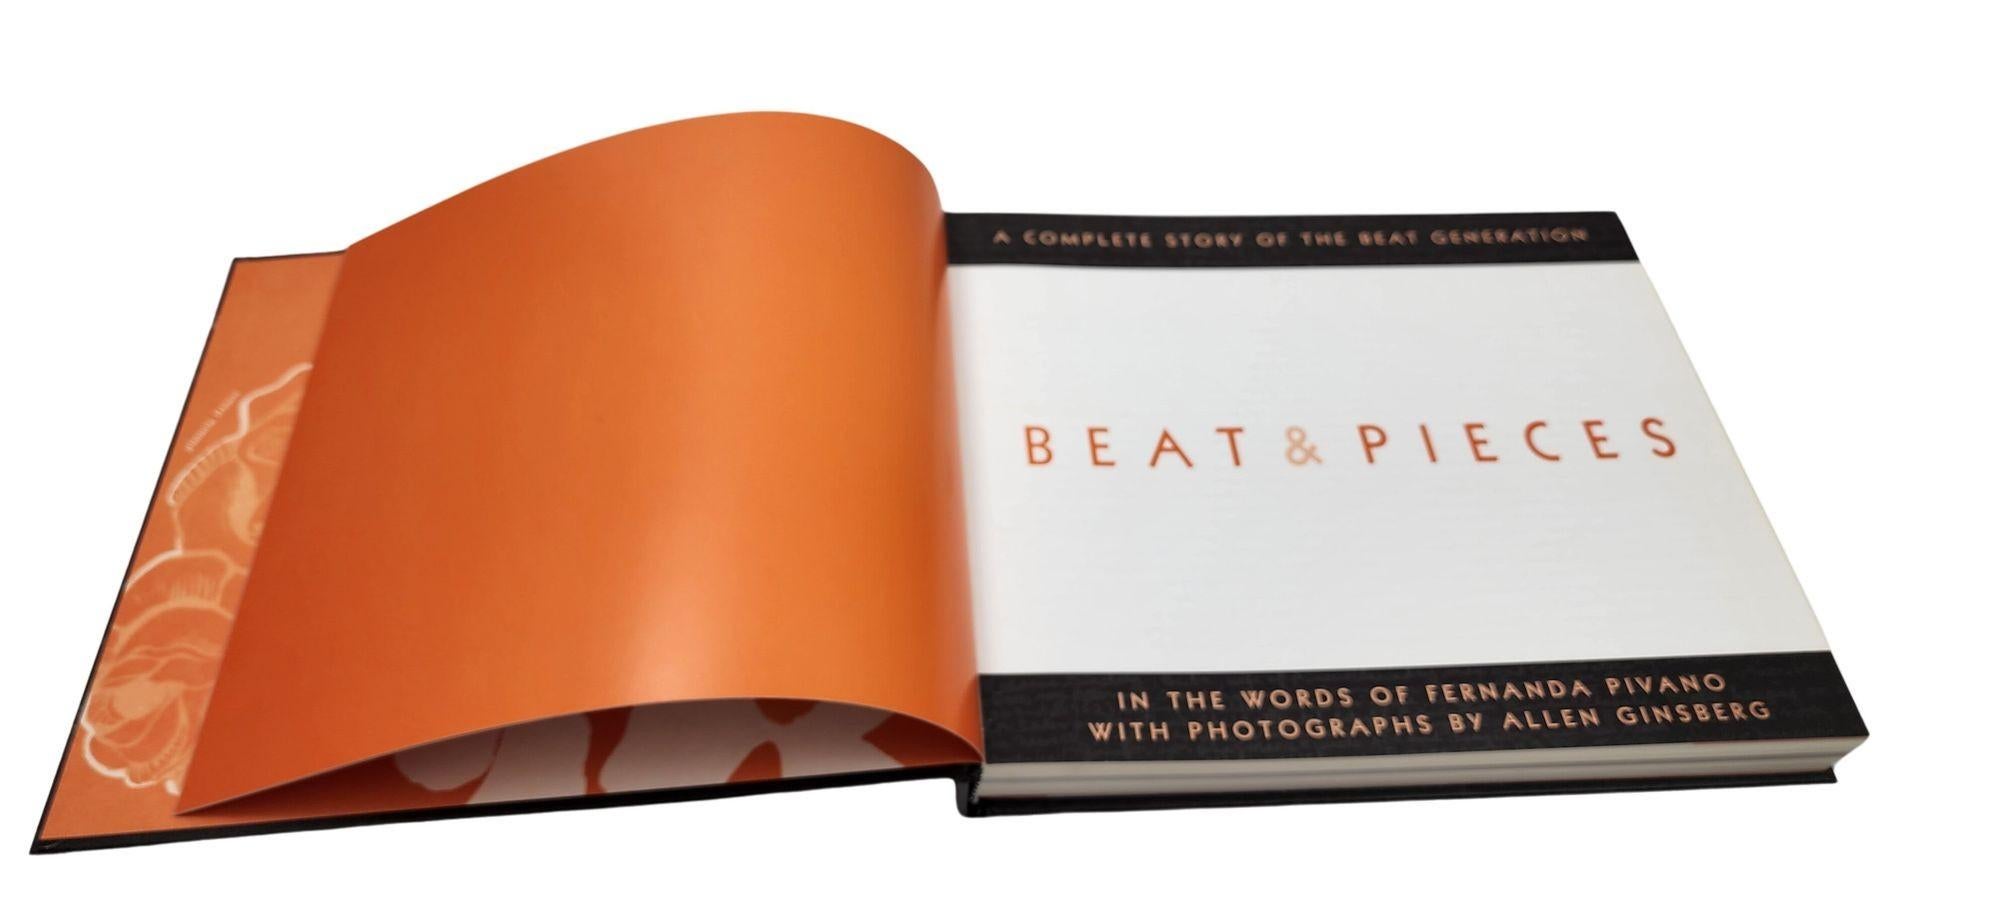 Beat and Pieces: A Complete Story of the Beat Generation by F. Pivano Limited Ed For Sale 2